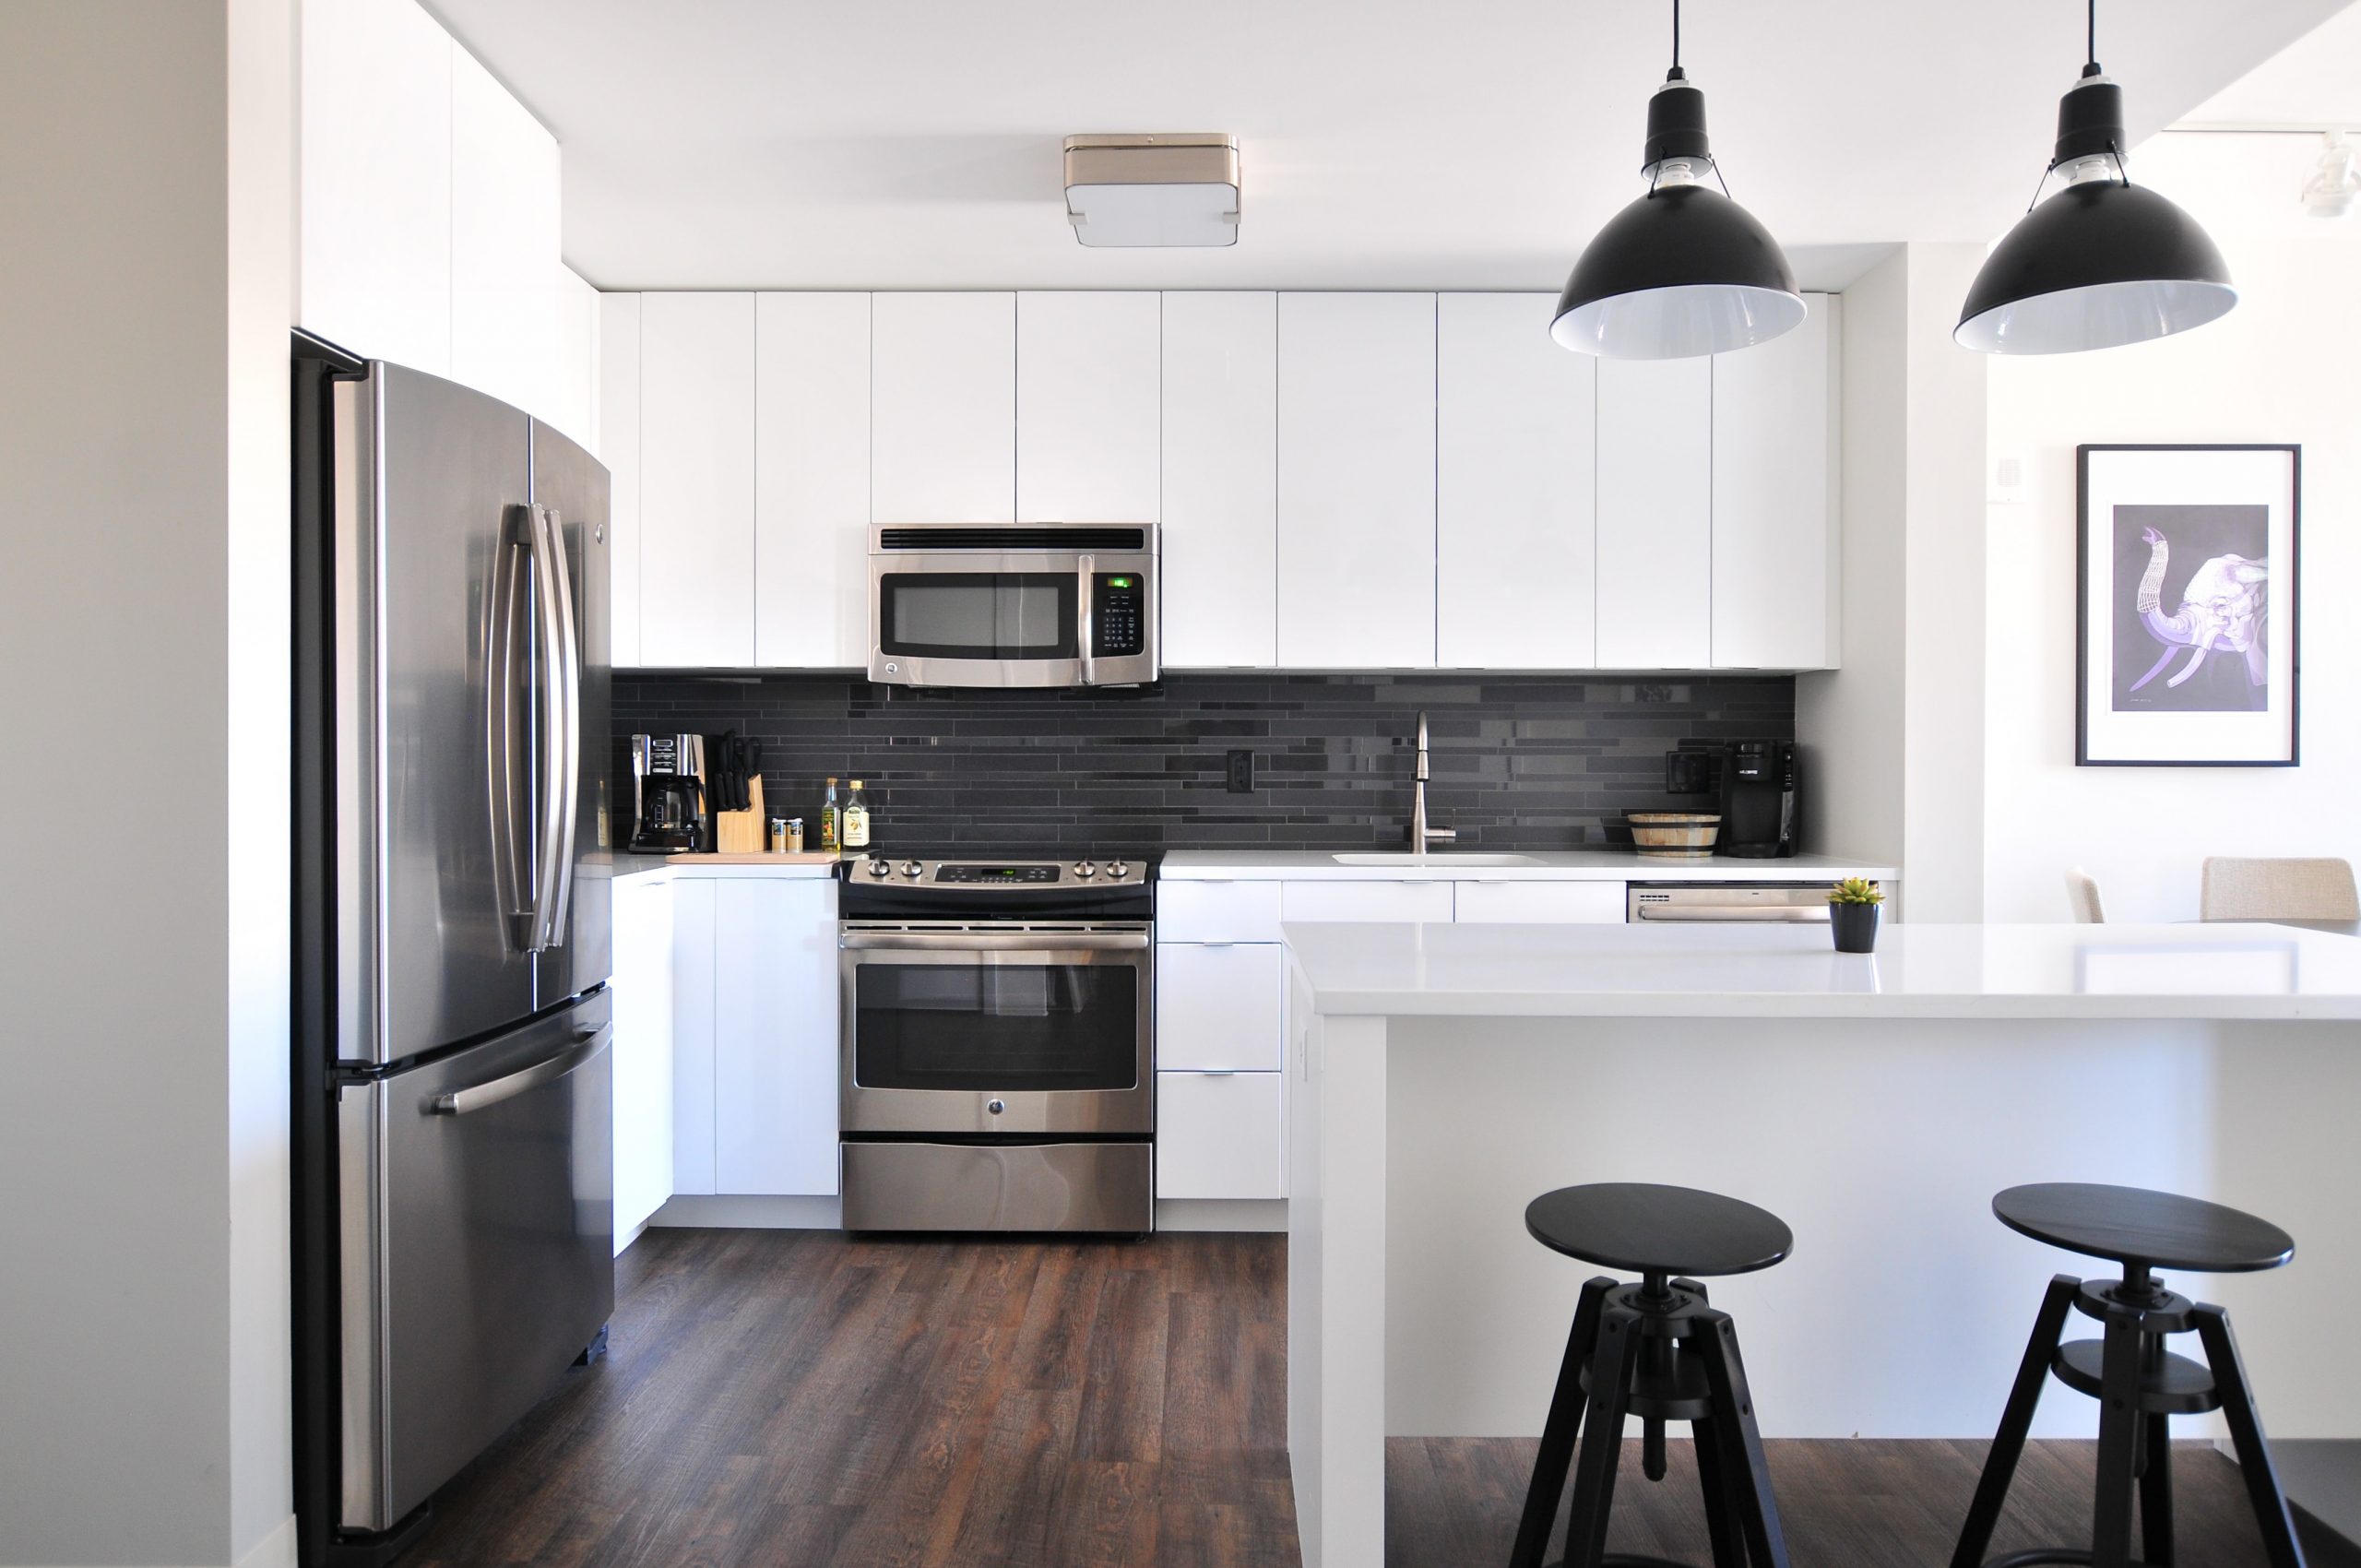 5 Ways You Can Use Recycled Materials For Your Kitchen Redesign